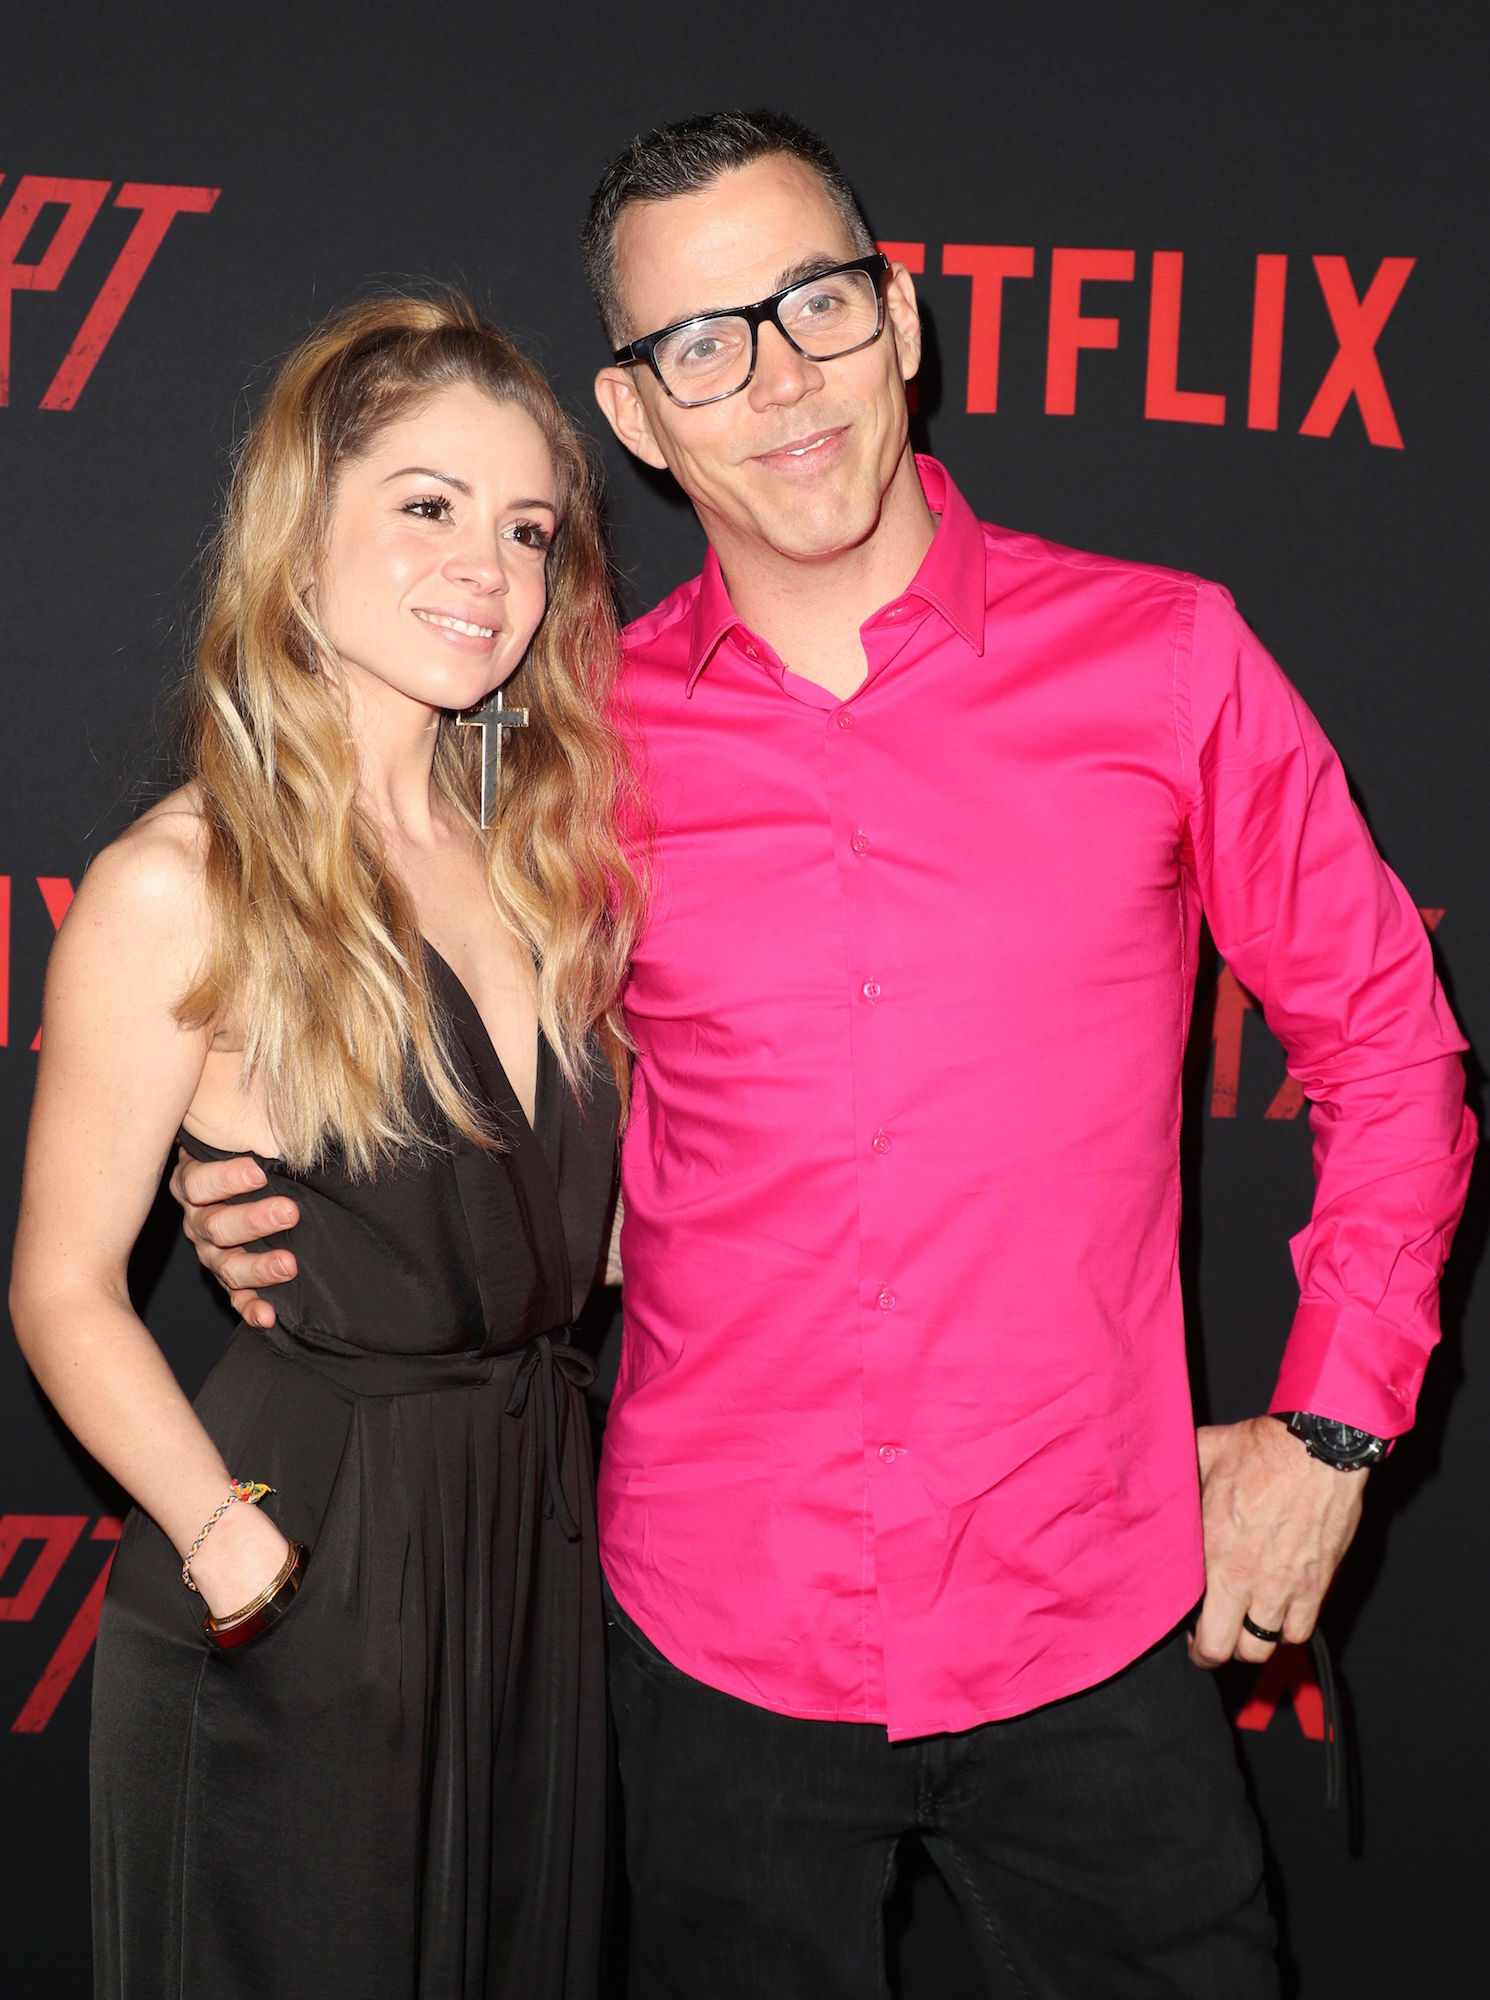 Naked Beach Dating - Steve-O's Fiancee Became More Comfortable With His Nudity Over Time